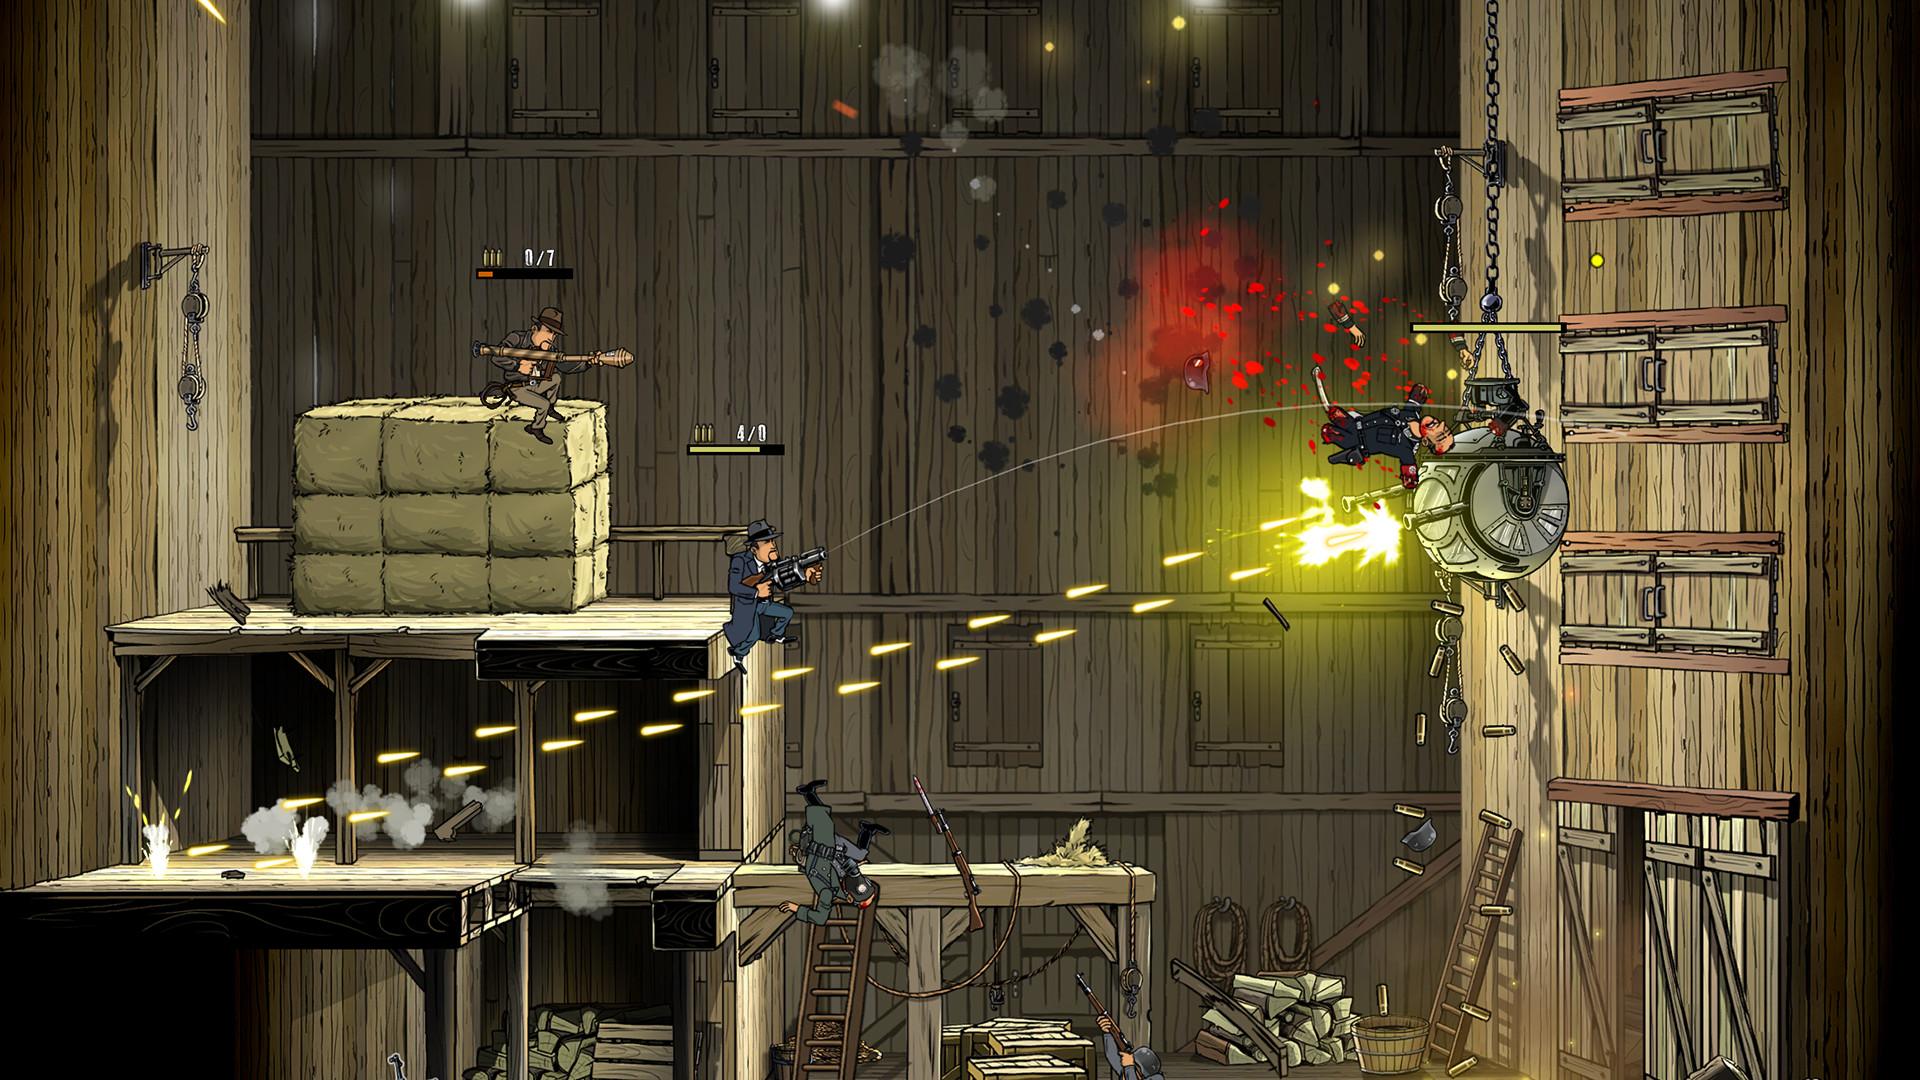 Guns, Gore and Cannoli 2 on Steam